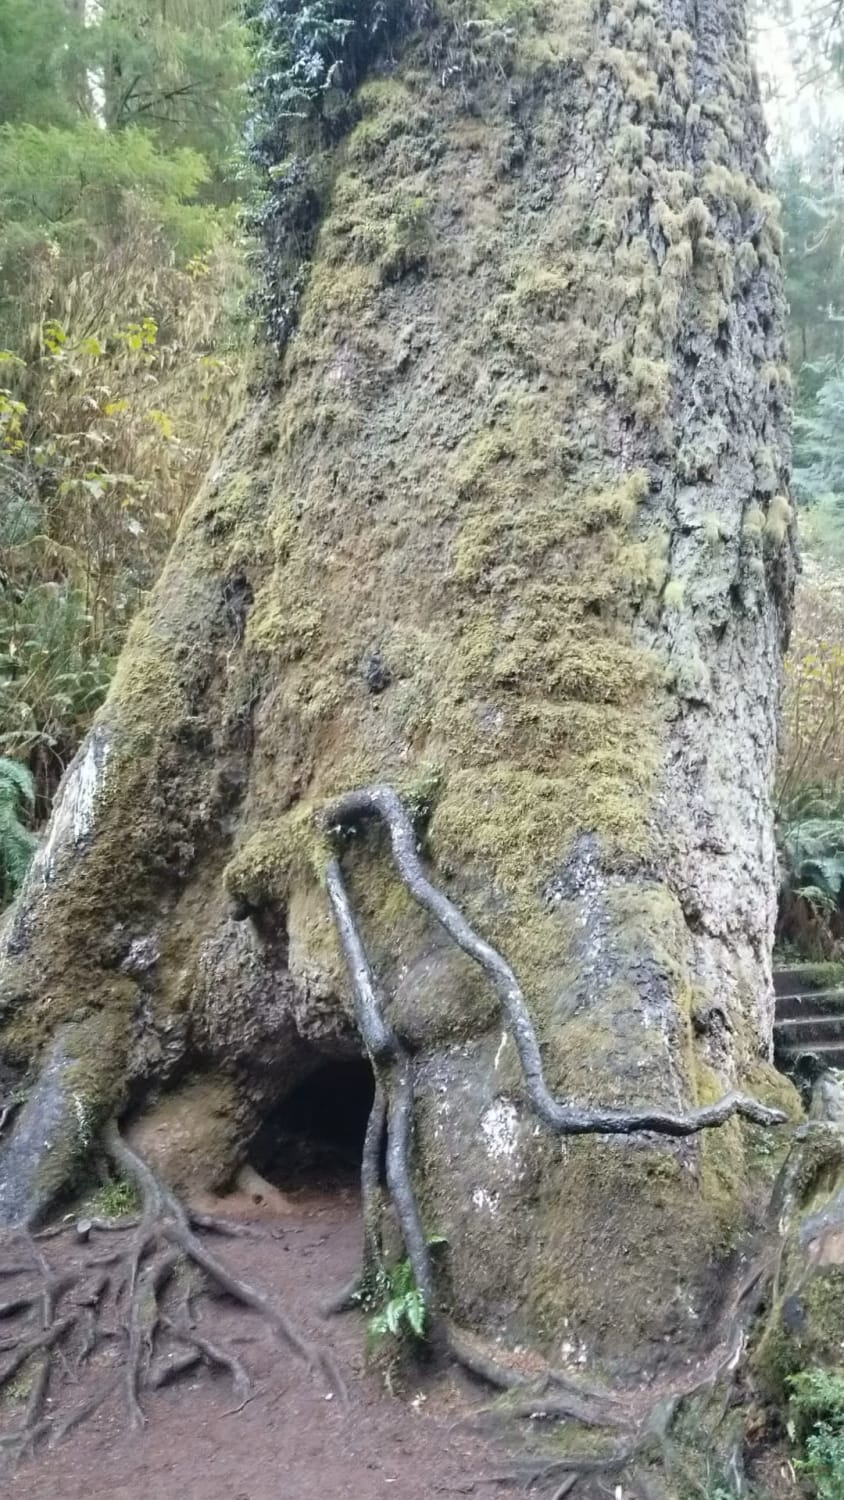 A giant spruce tree that has been growing for nearly 600 years on the Oregon Coast.